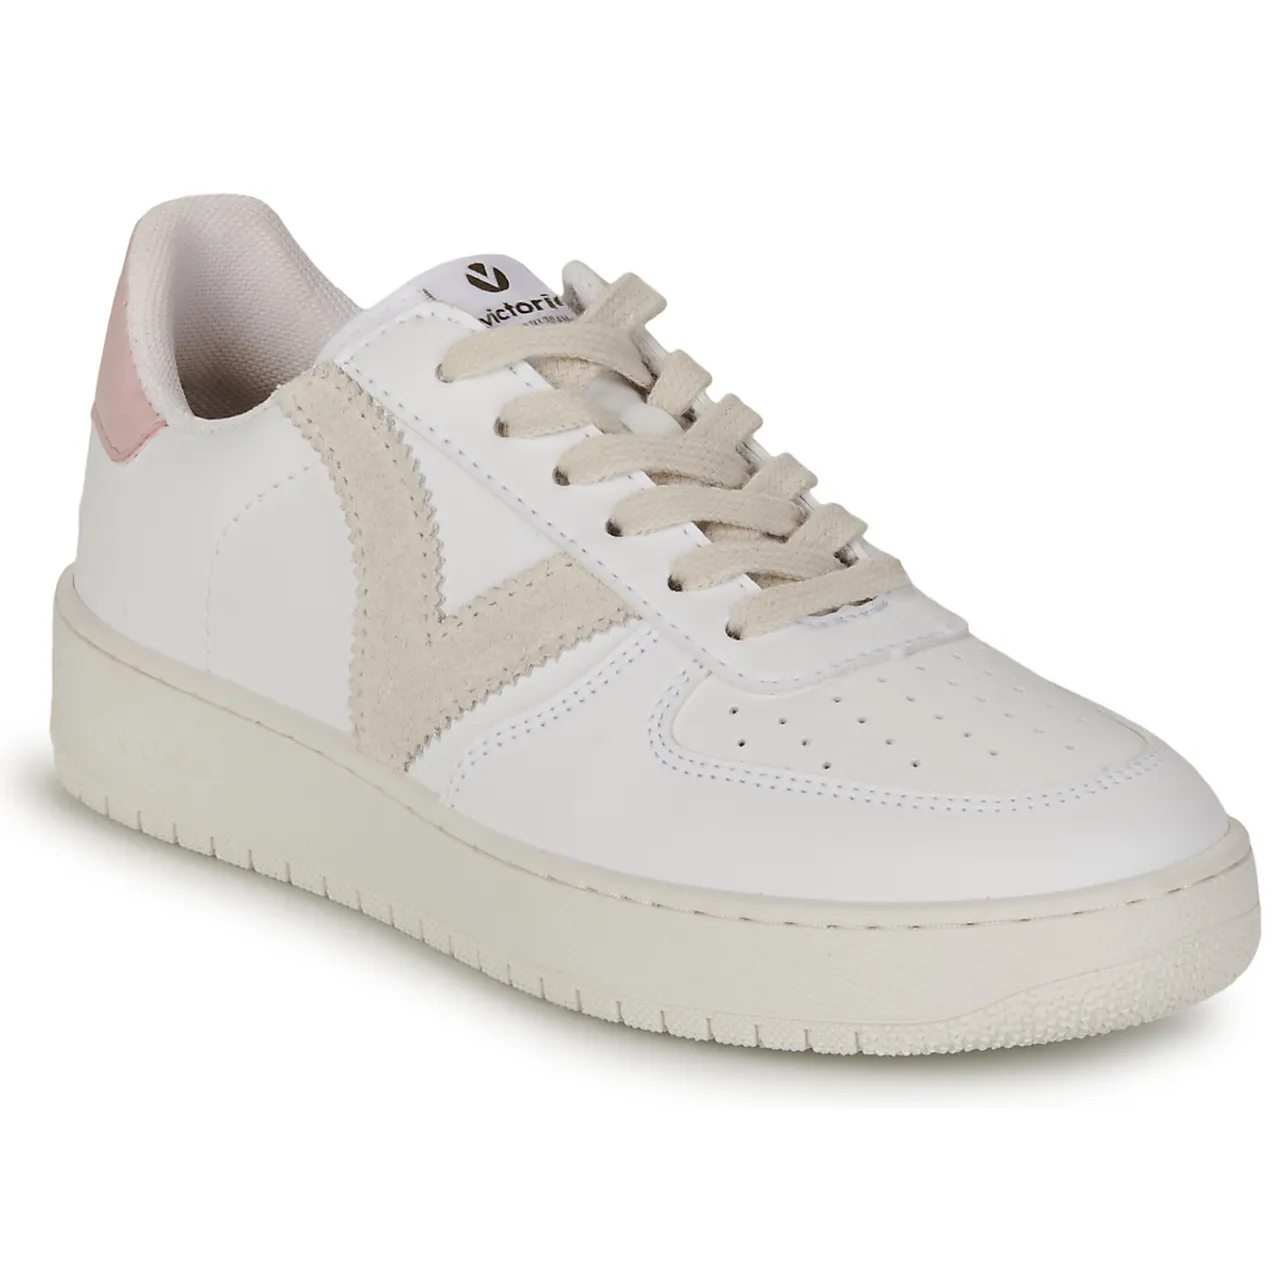 Victoria  MADRID  women's Shoes (Trainers) in White